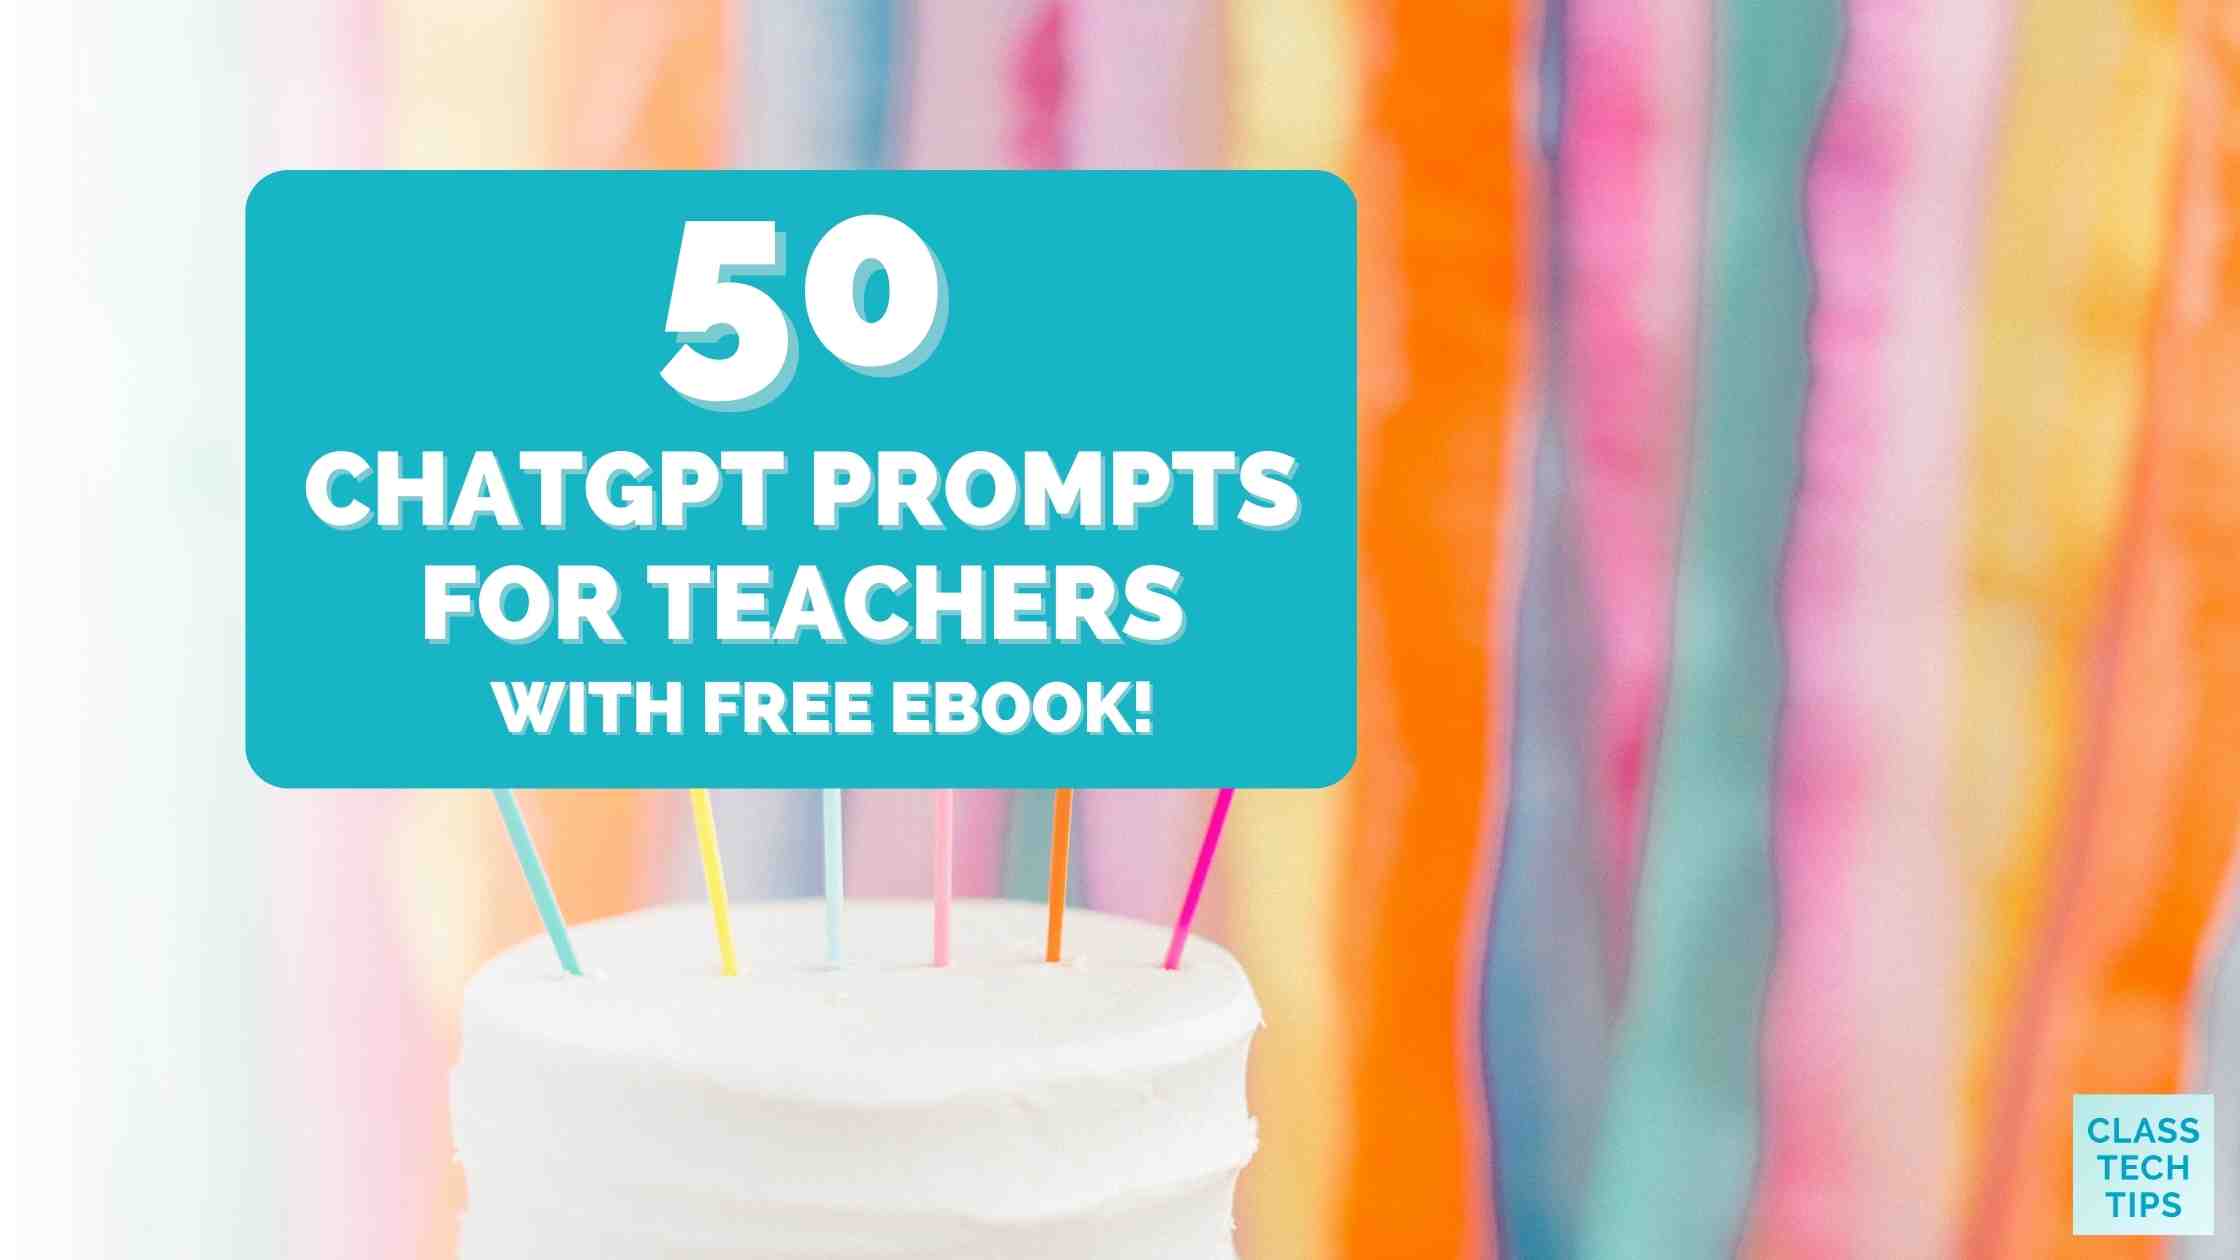 Top 10 Everyday Objects for Summer Learning and Fun - The Educators' Spin  On It